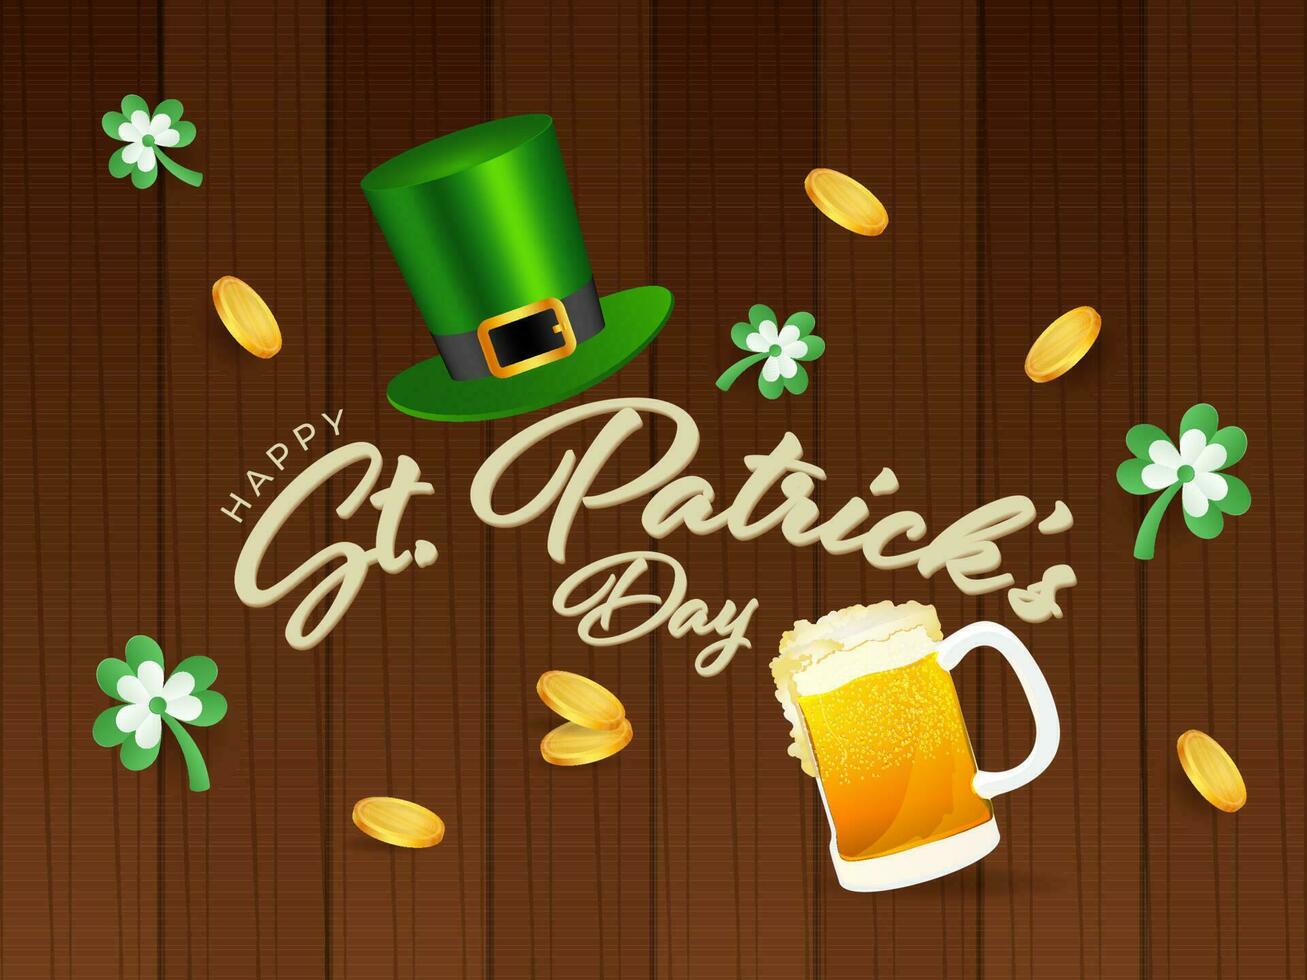 Happy St. Patrick's Day Font With Leprechaun Hat, Beer Mug, Golden Coins And Shamrock Leaves On Brown Wooden Background. vector